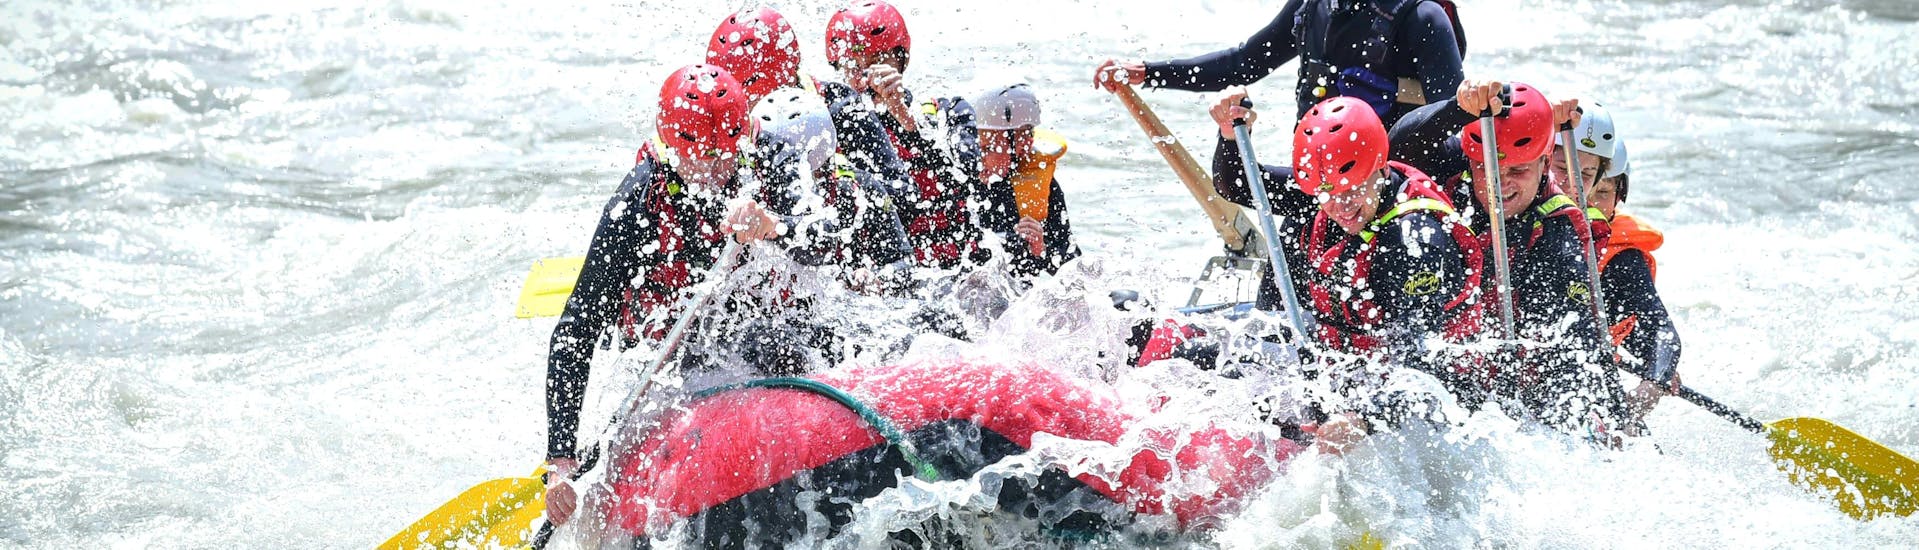 A rafting group mastering the wild waves and rollers of Ötztaler Ache on their Rafting Tour "Extreme" with Experience together with two state-certified guides from Natur Pur Outdoorsports.